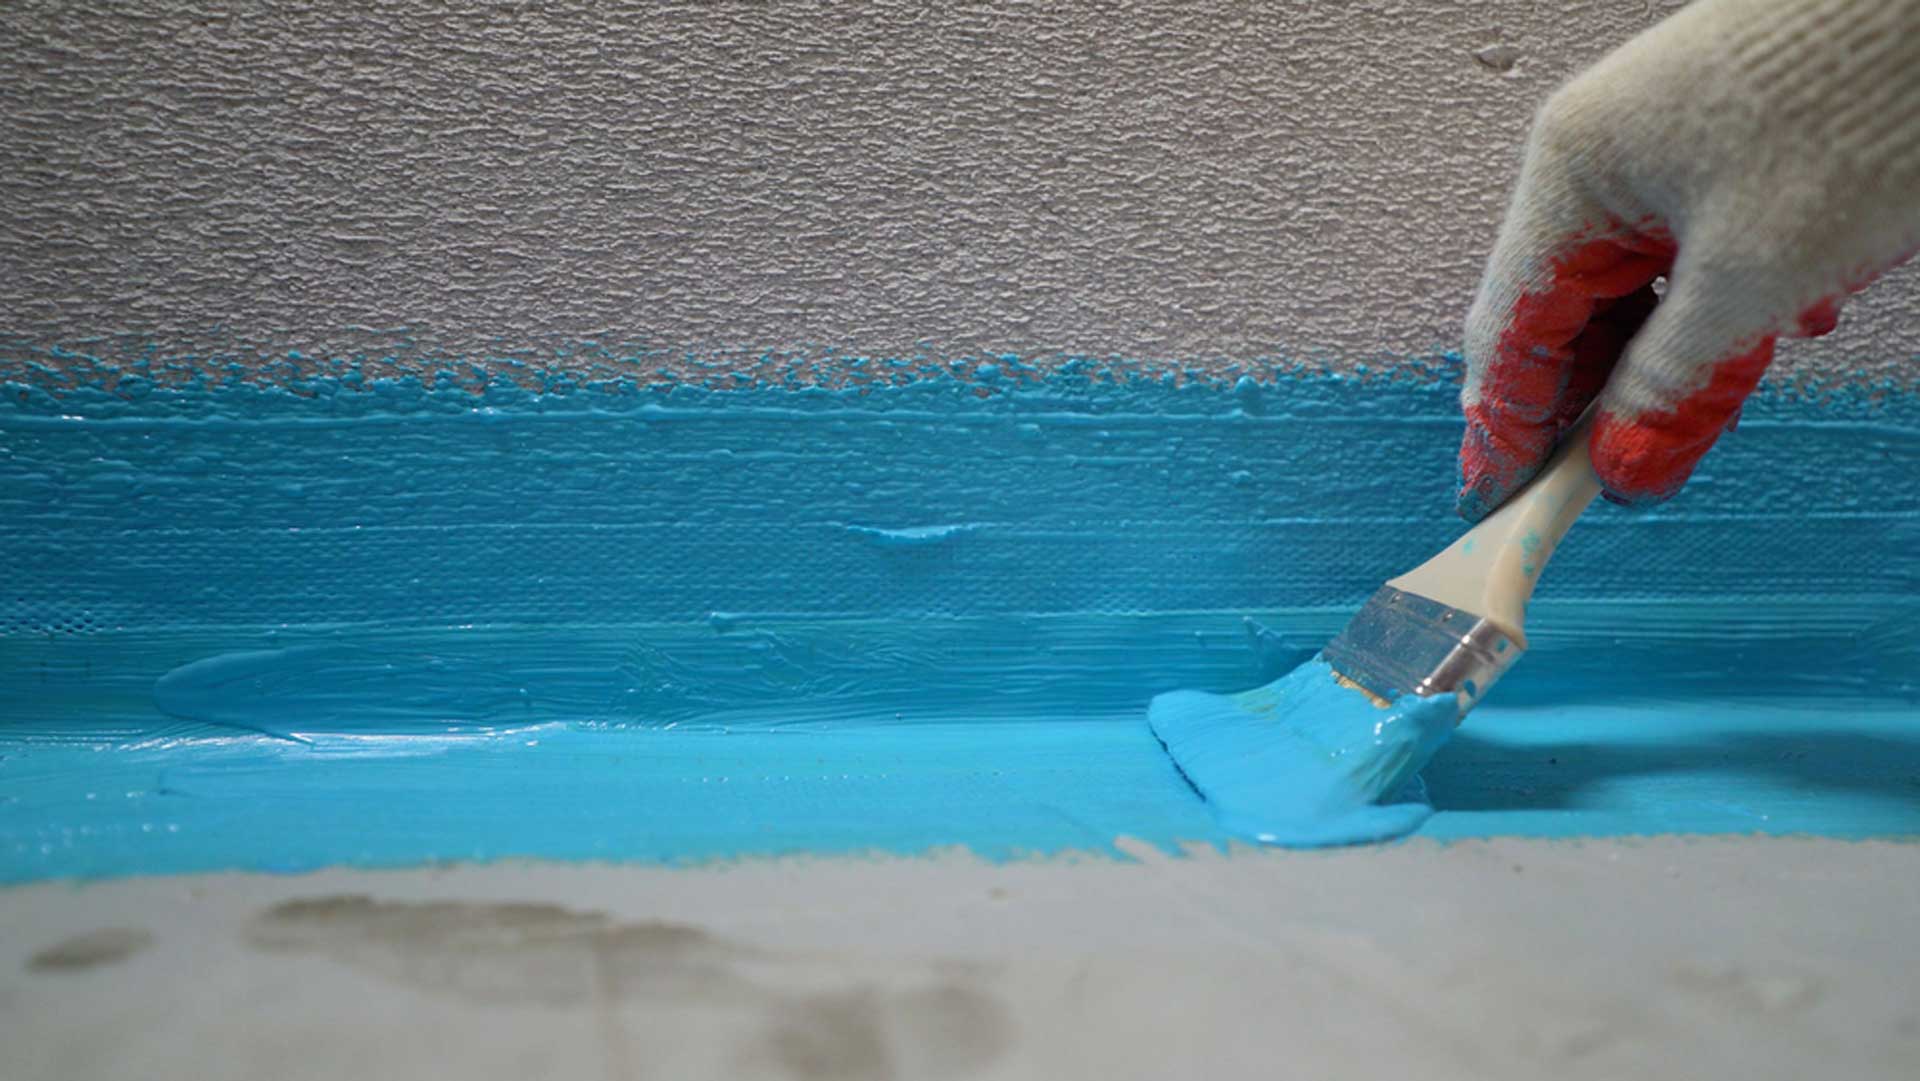 Impress Tiling and Waterproofing